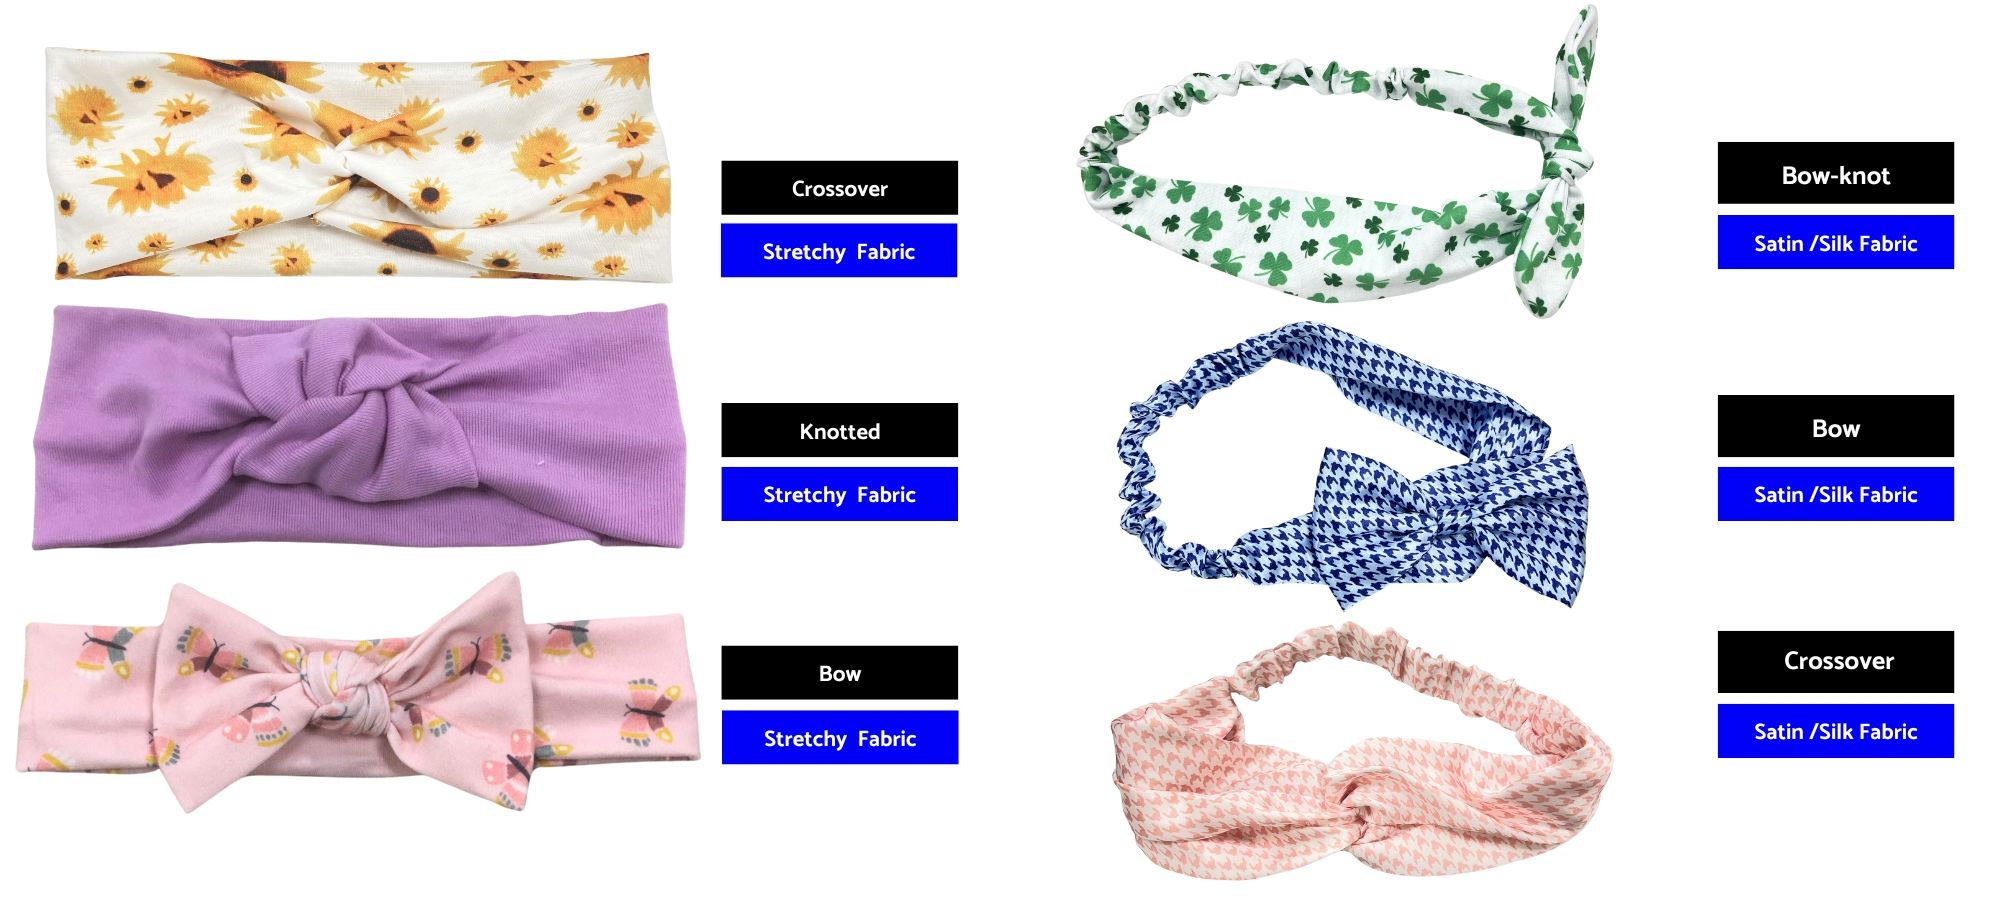 Customize your elastic headbands with a range of colors and designs available at our factory.